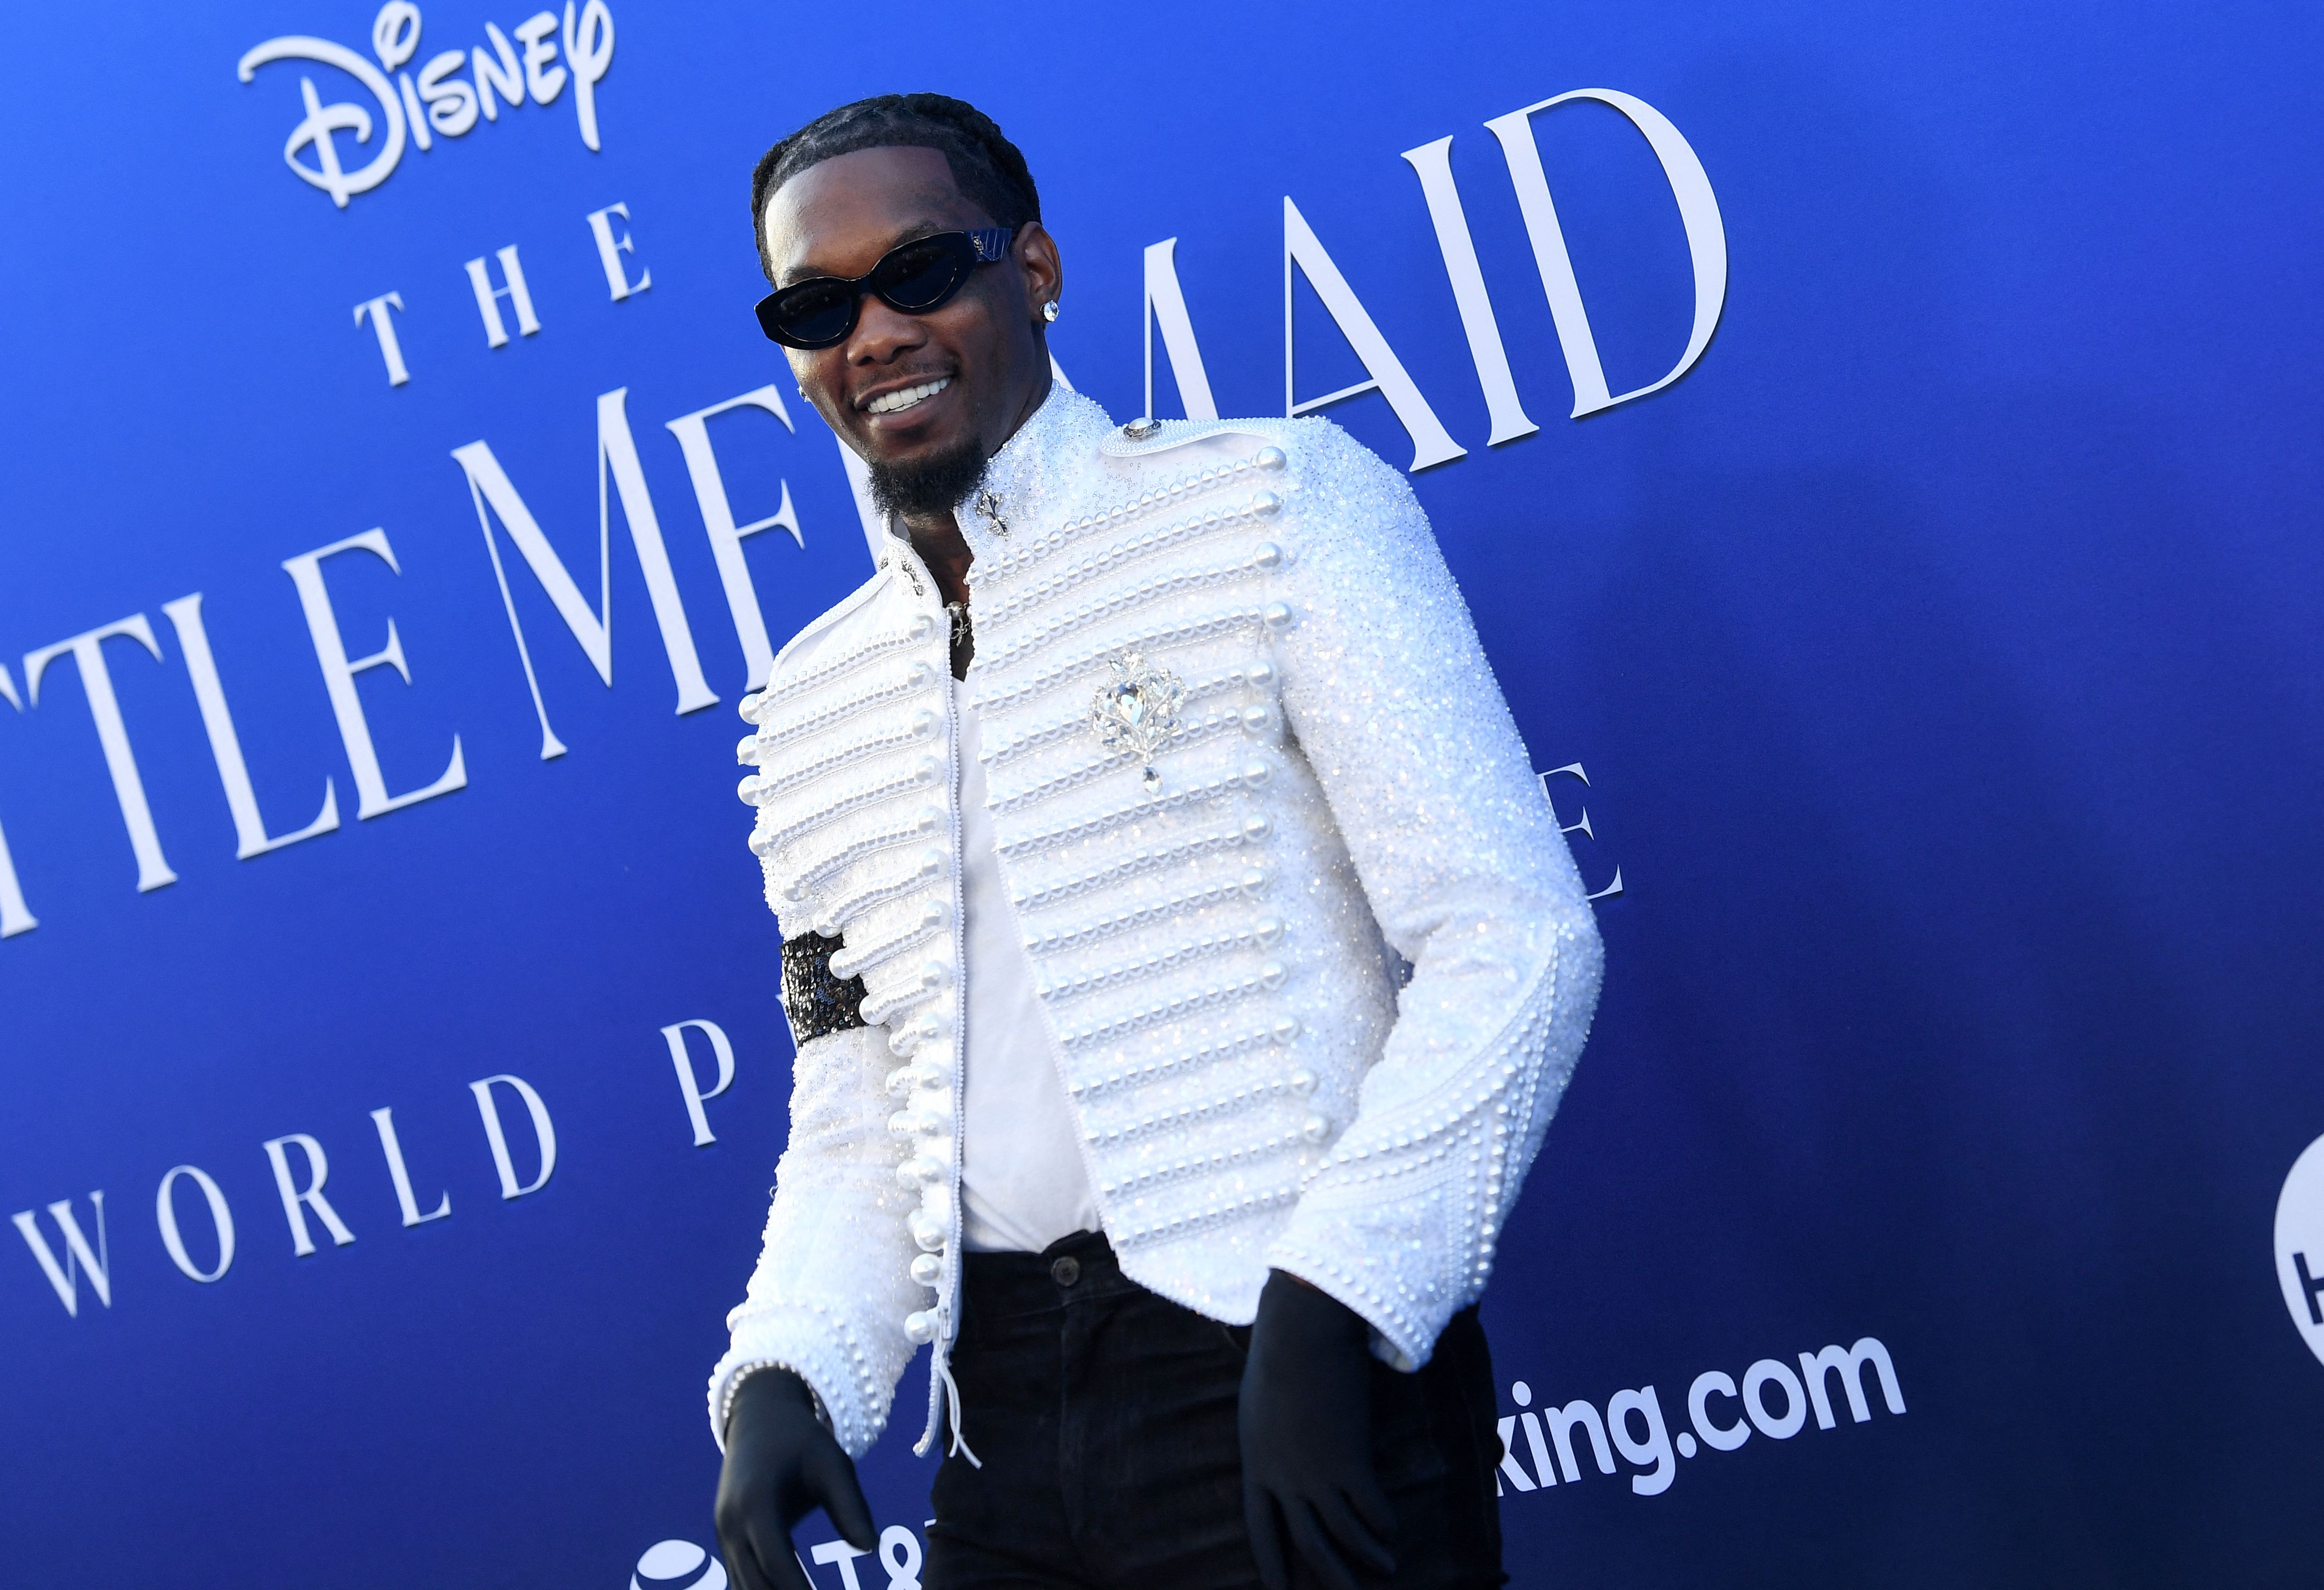 Offset, Chloe Bailey, Daveed Diggs, & More Attend “Little Mermaid” Premiere